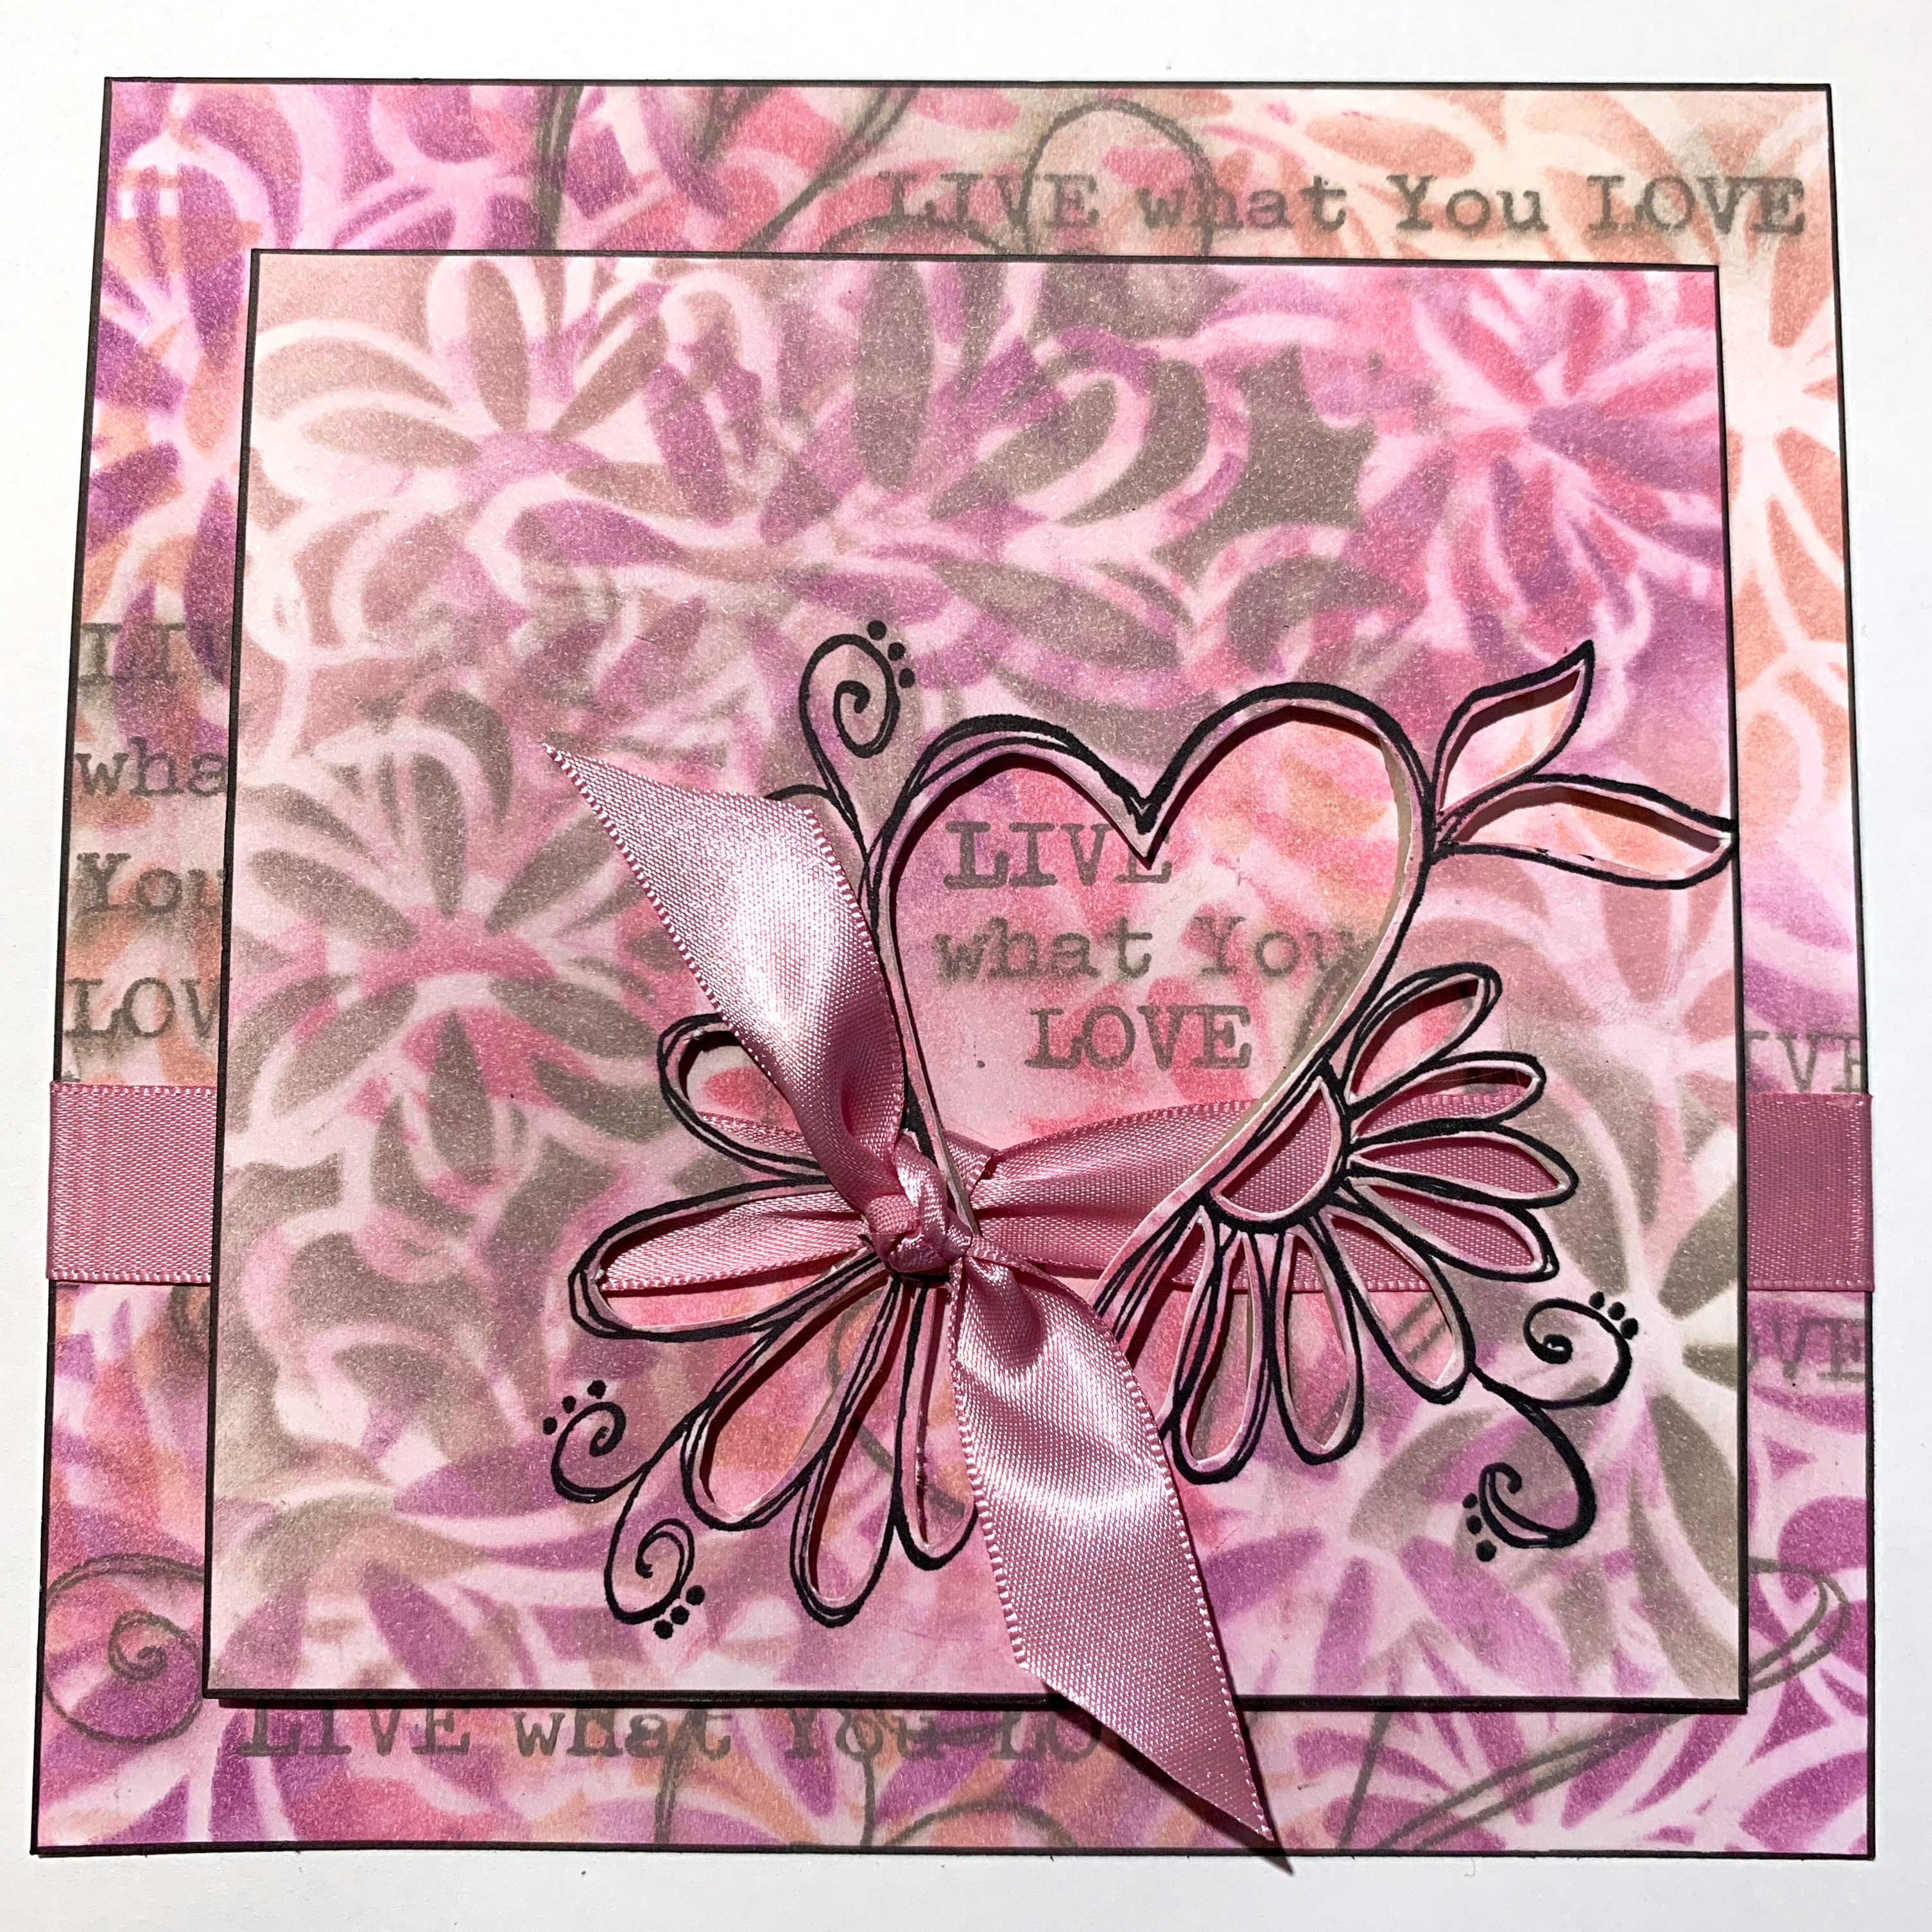 Scrapbook Card  featuring Dare 2B Artzy Stamps designed by Cathie Allan